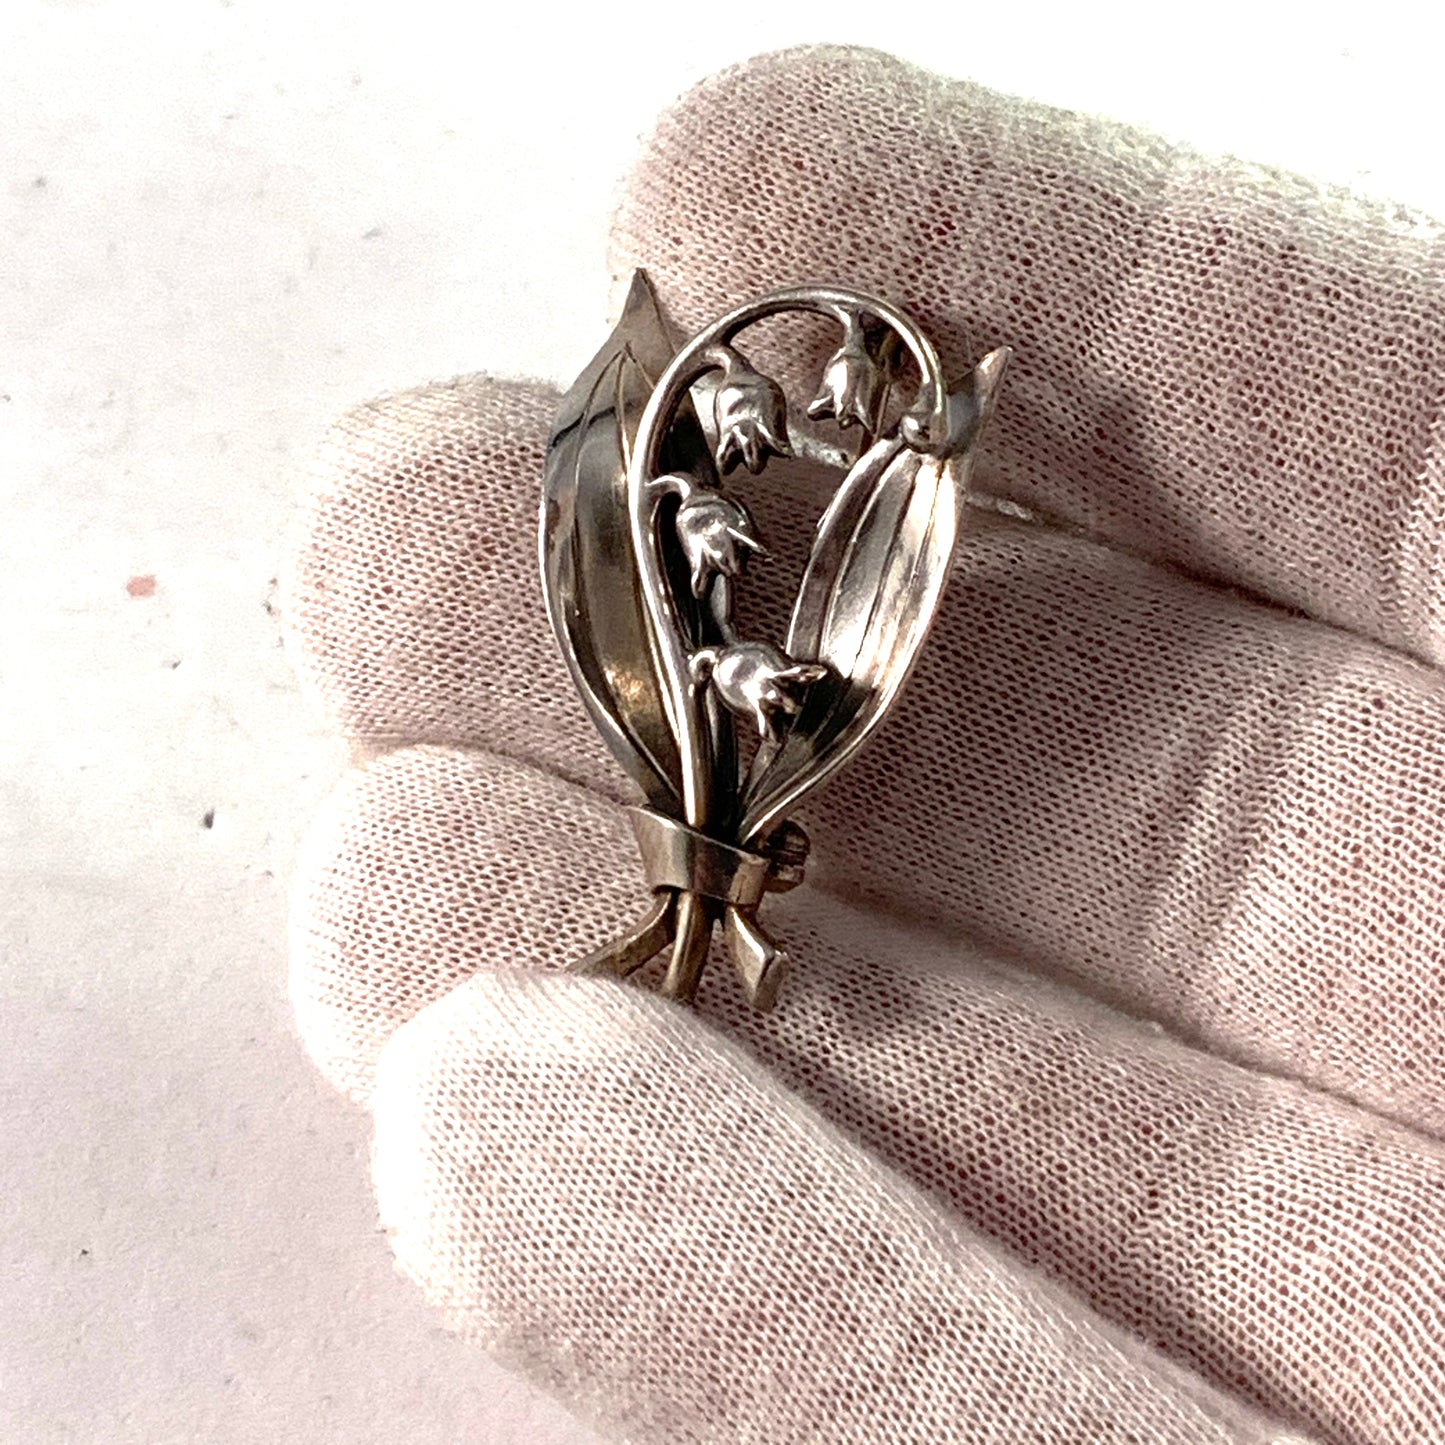 Wahlberg, Sweden 1939 Sterling Silver Lily of the Valley Brooch